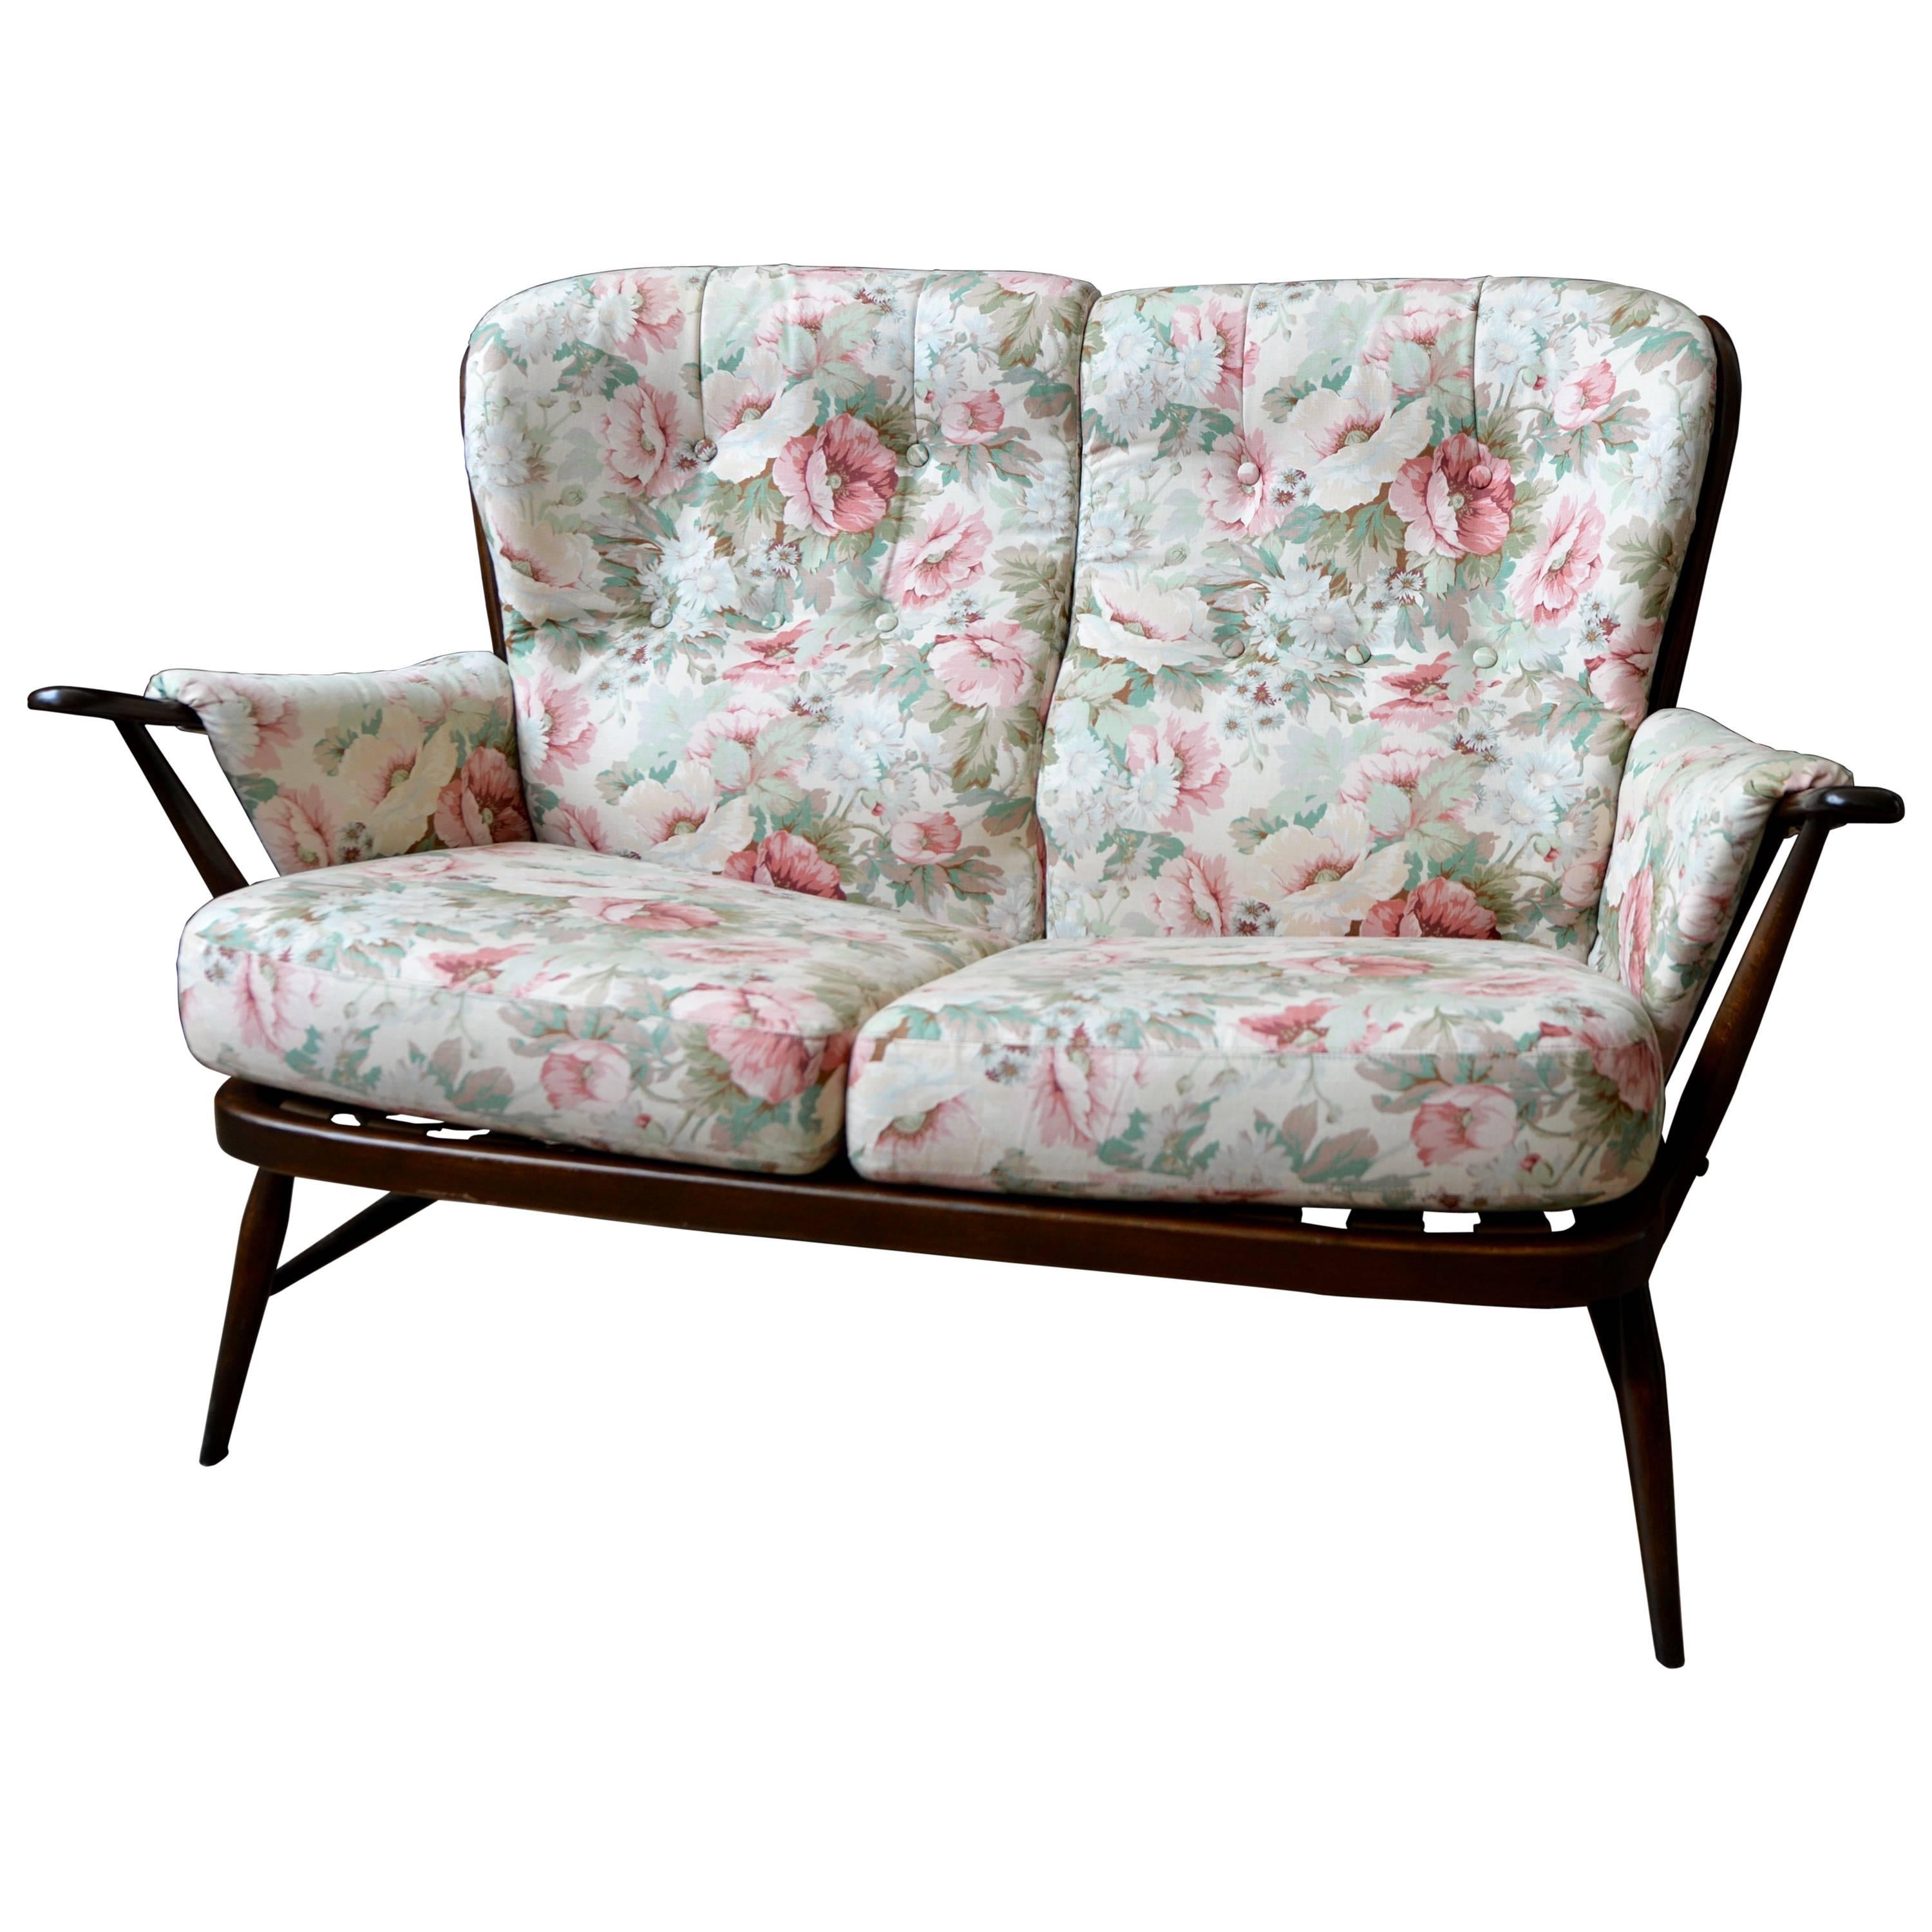 1960 Ercol Evergreen Two-Seat Sofa with Original Garden Blossom Upholstery